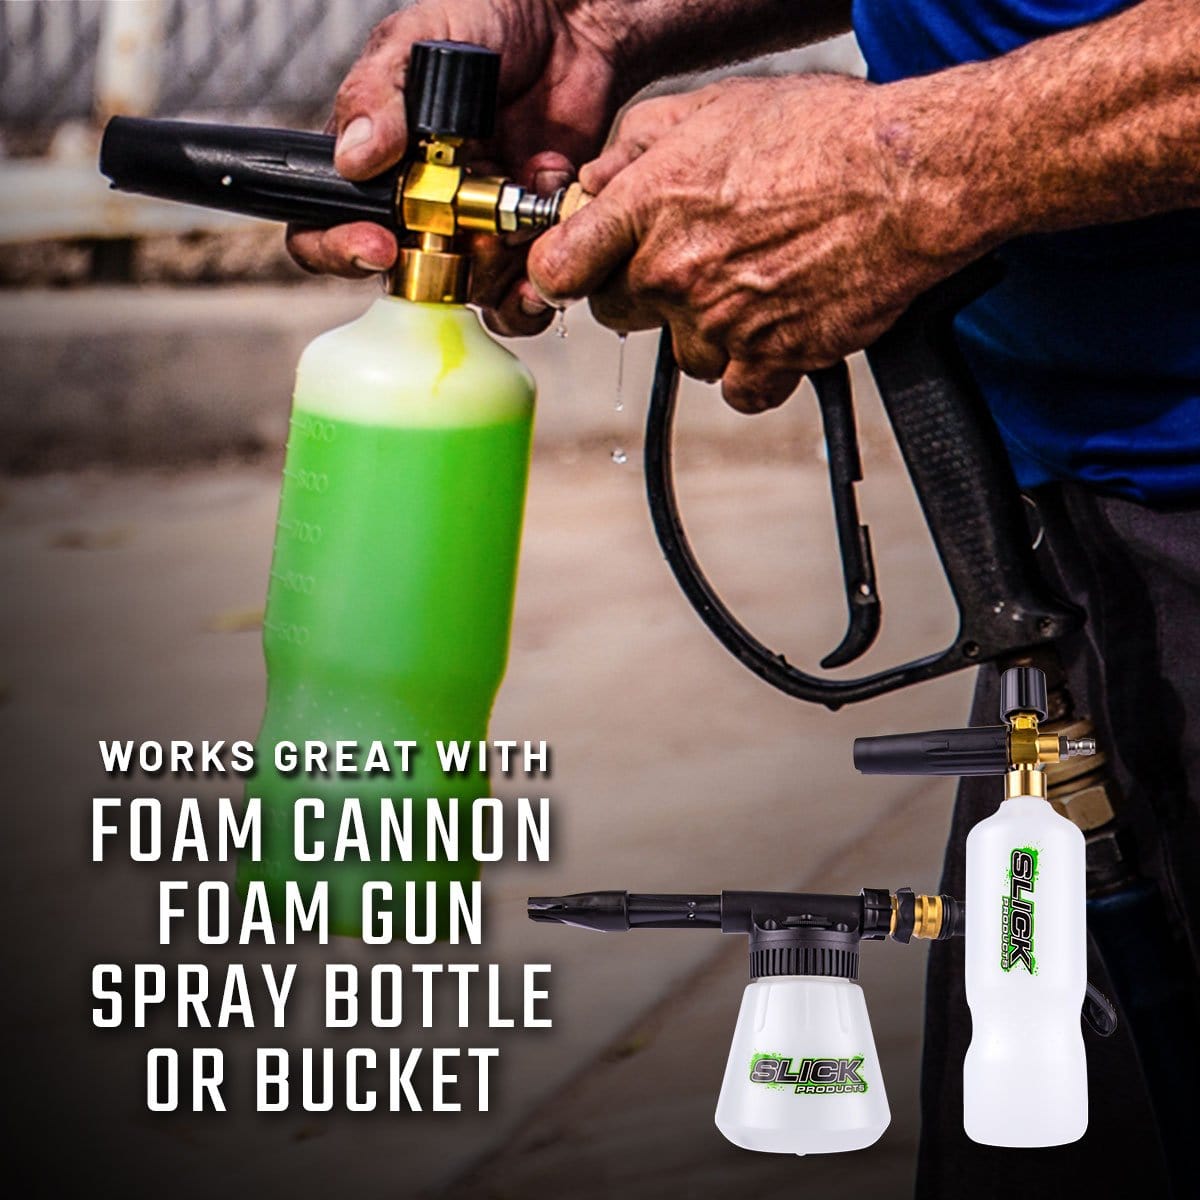 Slick Products Pressure Washer Foam Cannon, Scrub Brush, and Off-Road Wash  Super Concentrated Extra-Thick Soap Removes Heavy Dirt and Mud From Dirt